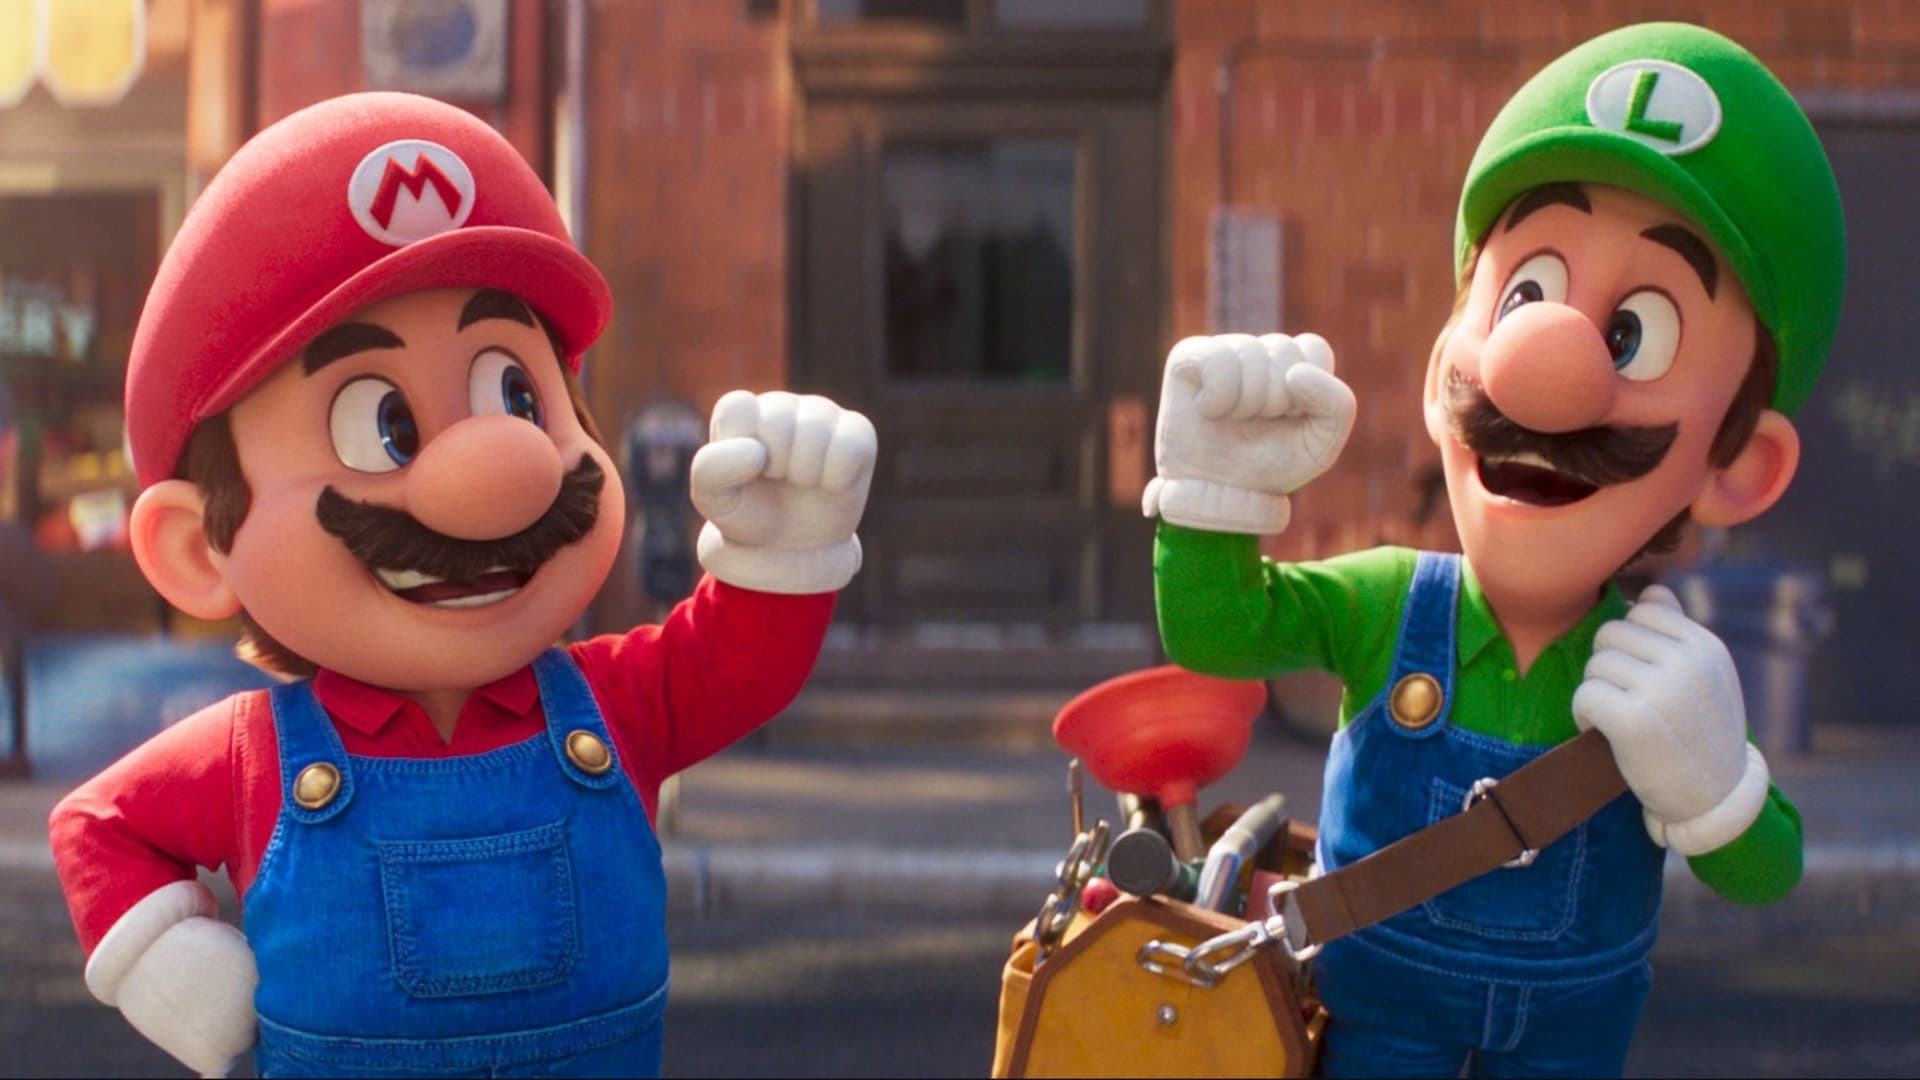 Where have all the billion-dollar movies gone? So far, only Mario’s been super this year